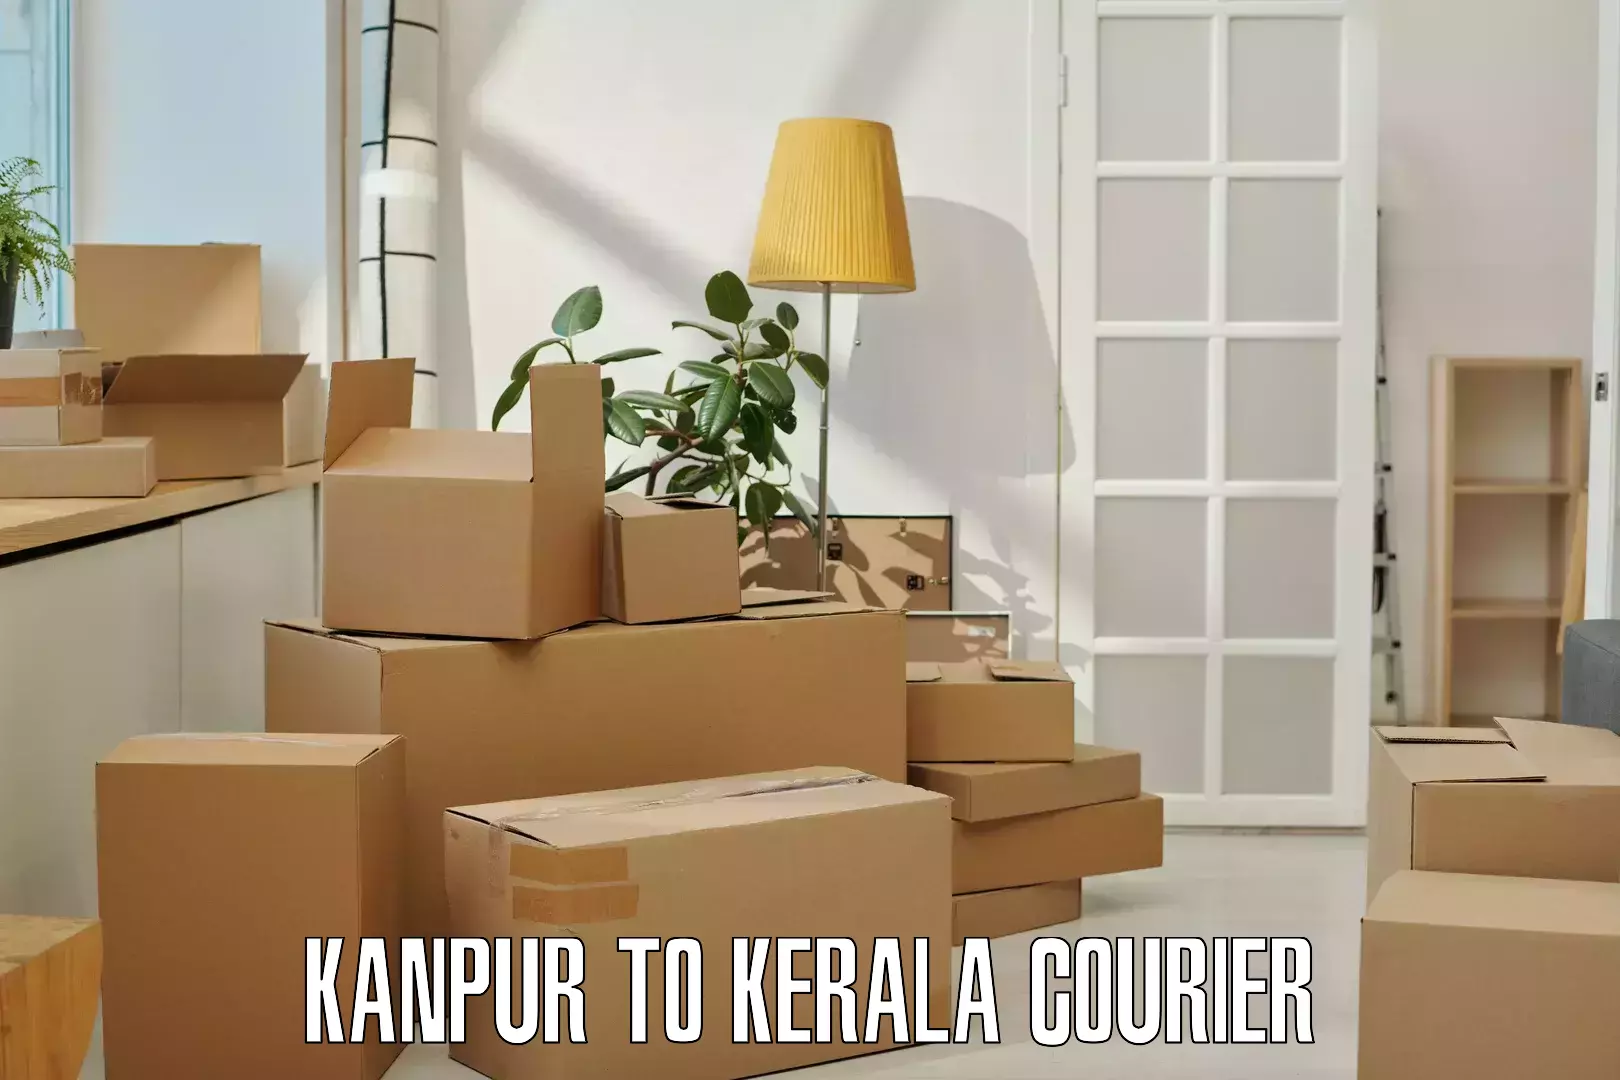 Cost-effective shipping solutions Kanpur to Cochin Port Kochi